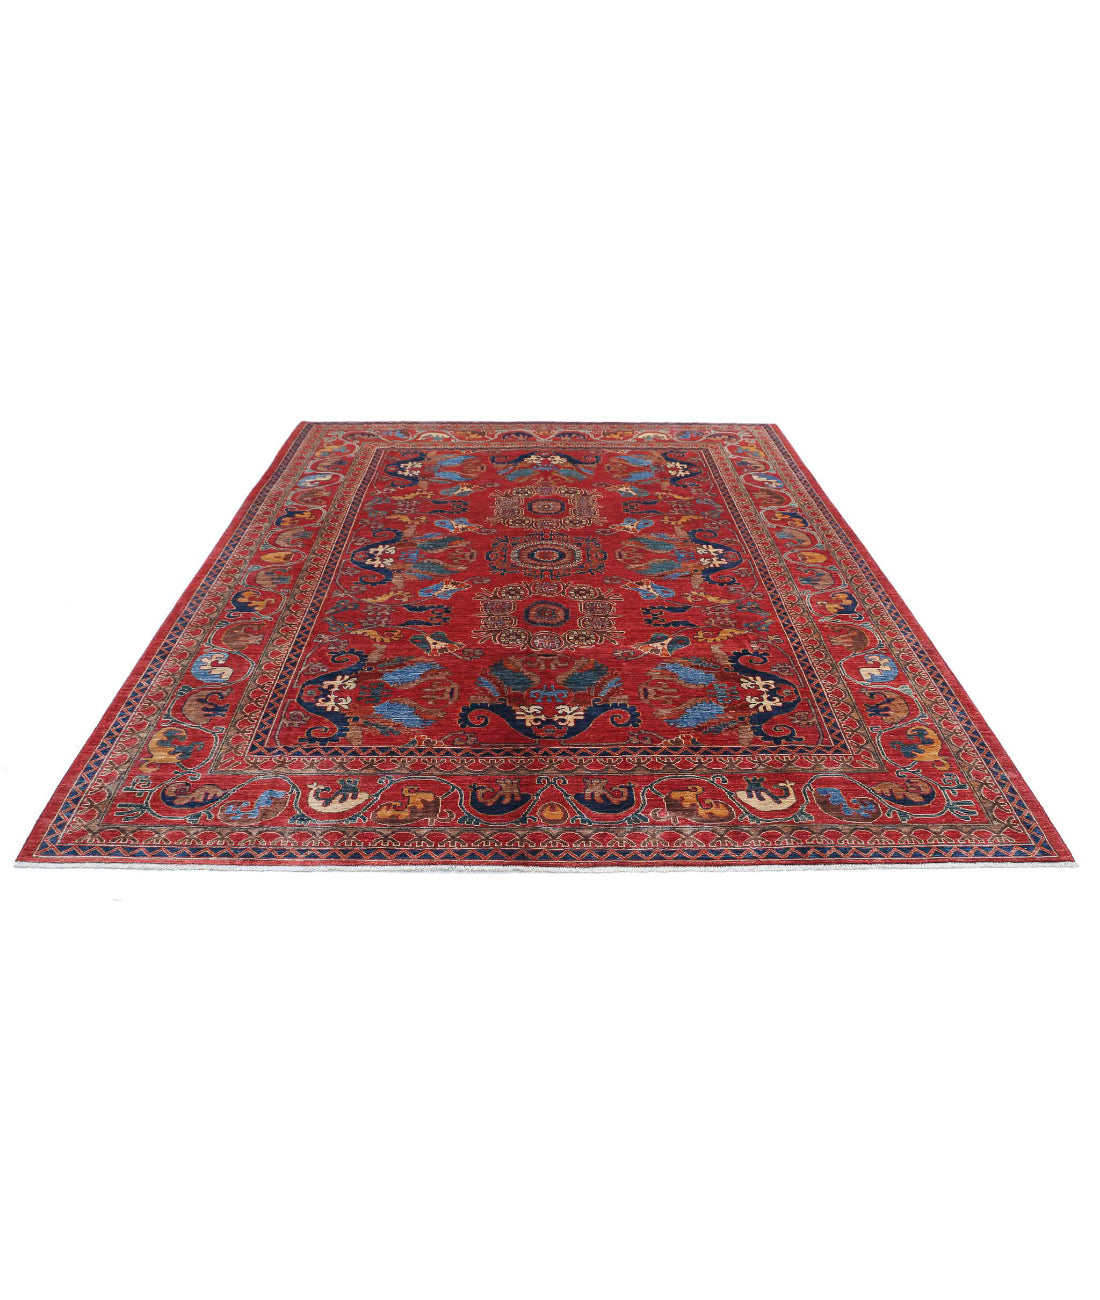 Hand Knotted Nomadic Caucasian Humna Wool Rug - 8'4'' x 9'8'' 8'4'' x 9'8'' (250 X 290) / Red / Blue